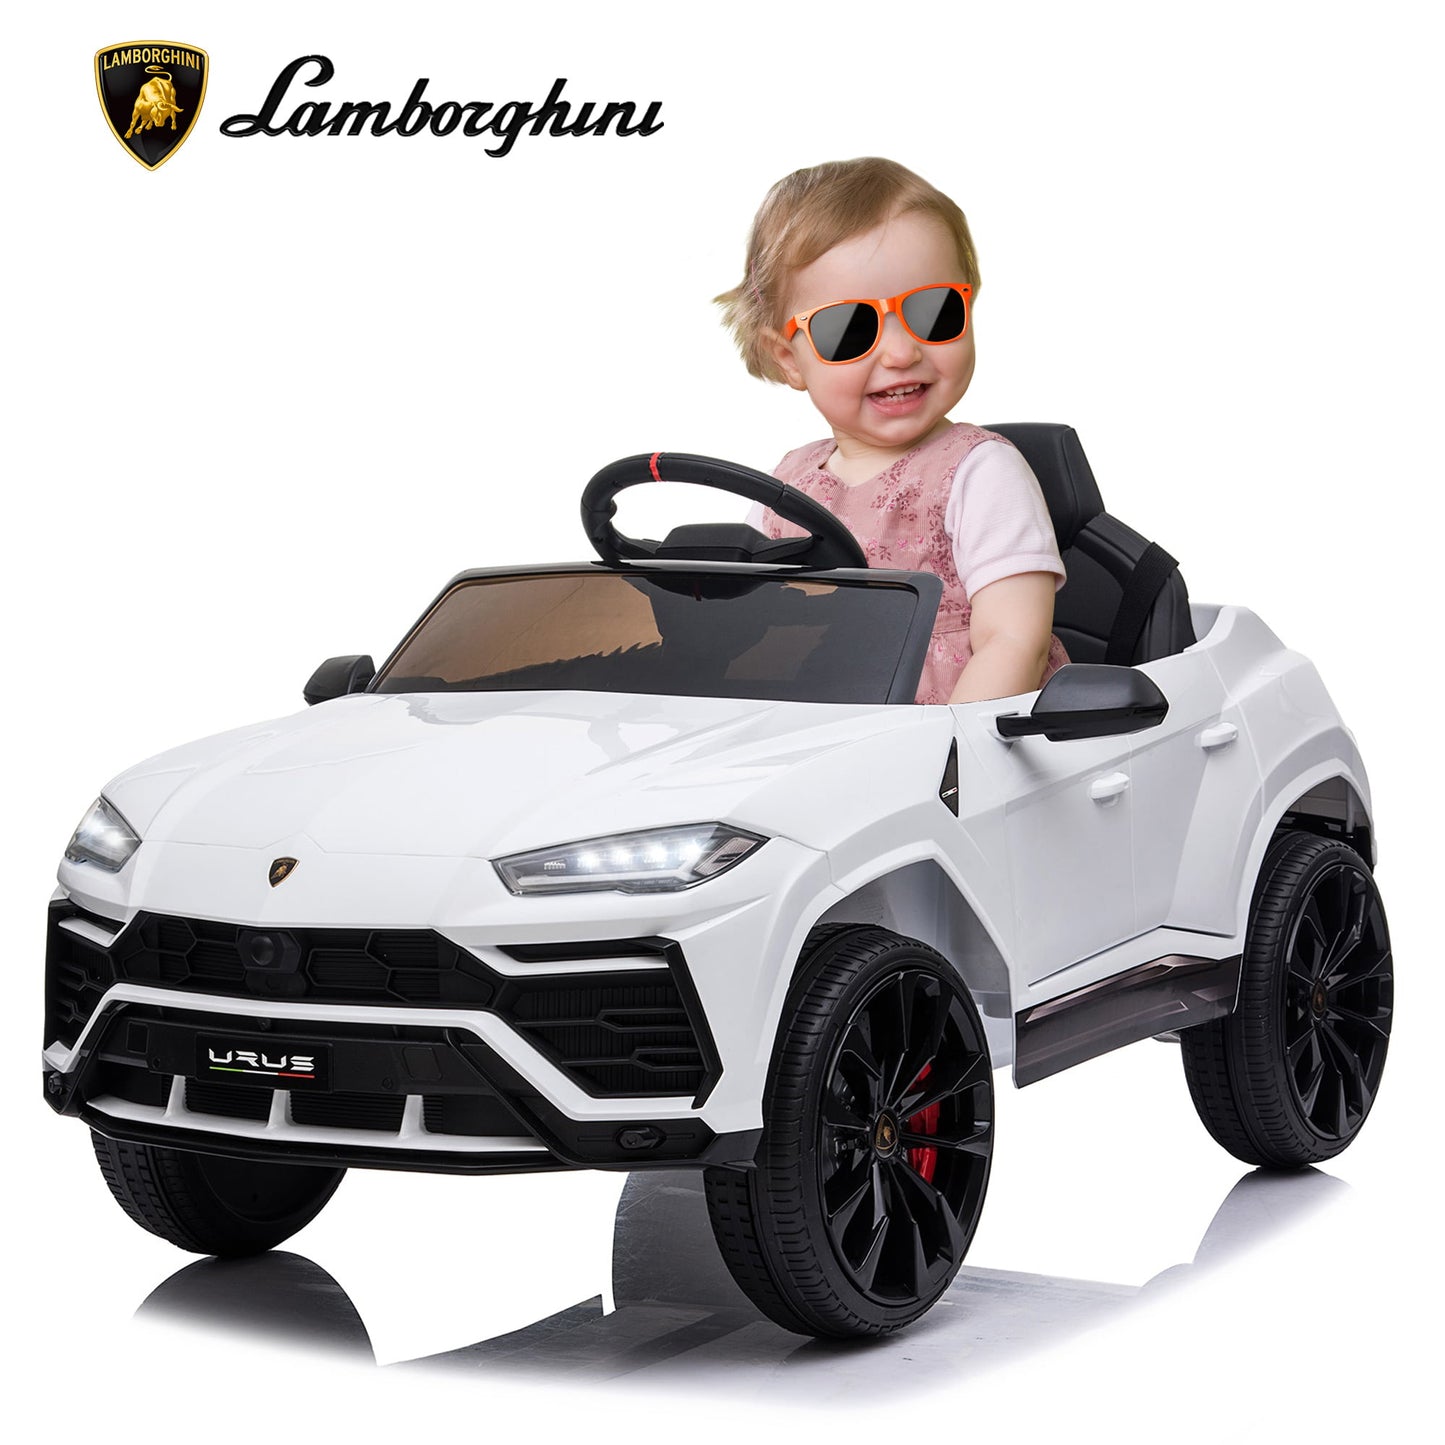 iRerts 12V Lamborghini Charger SRT Boys Girls Kids Ride on Car Toys, Electric 12V Battery Operated Riding Toys with Remote Control for Christmas Birthday Gift,White